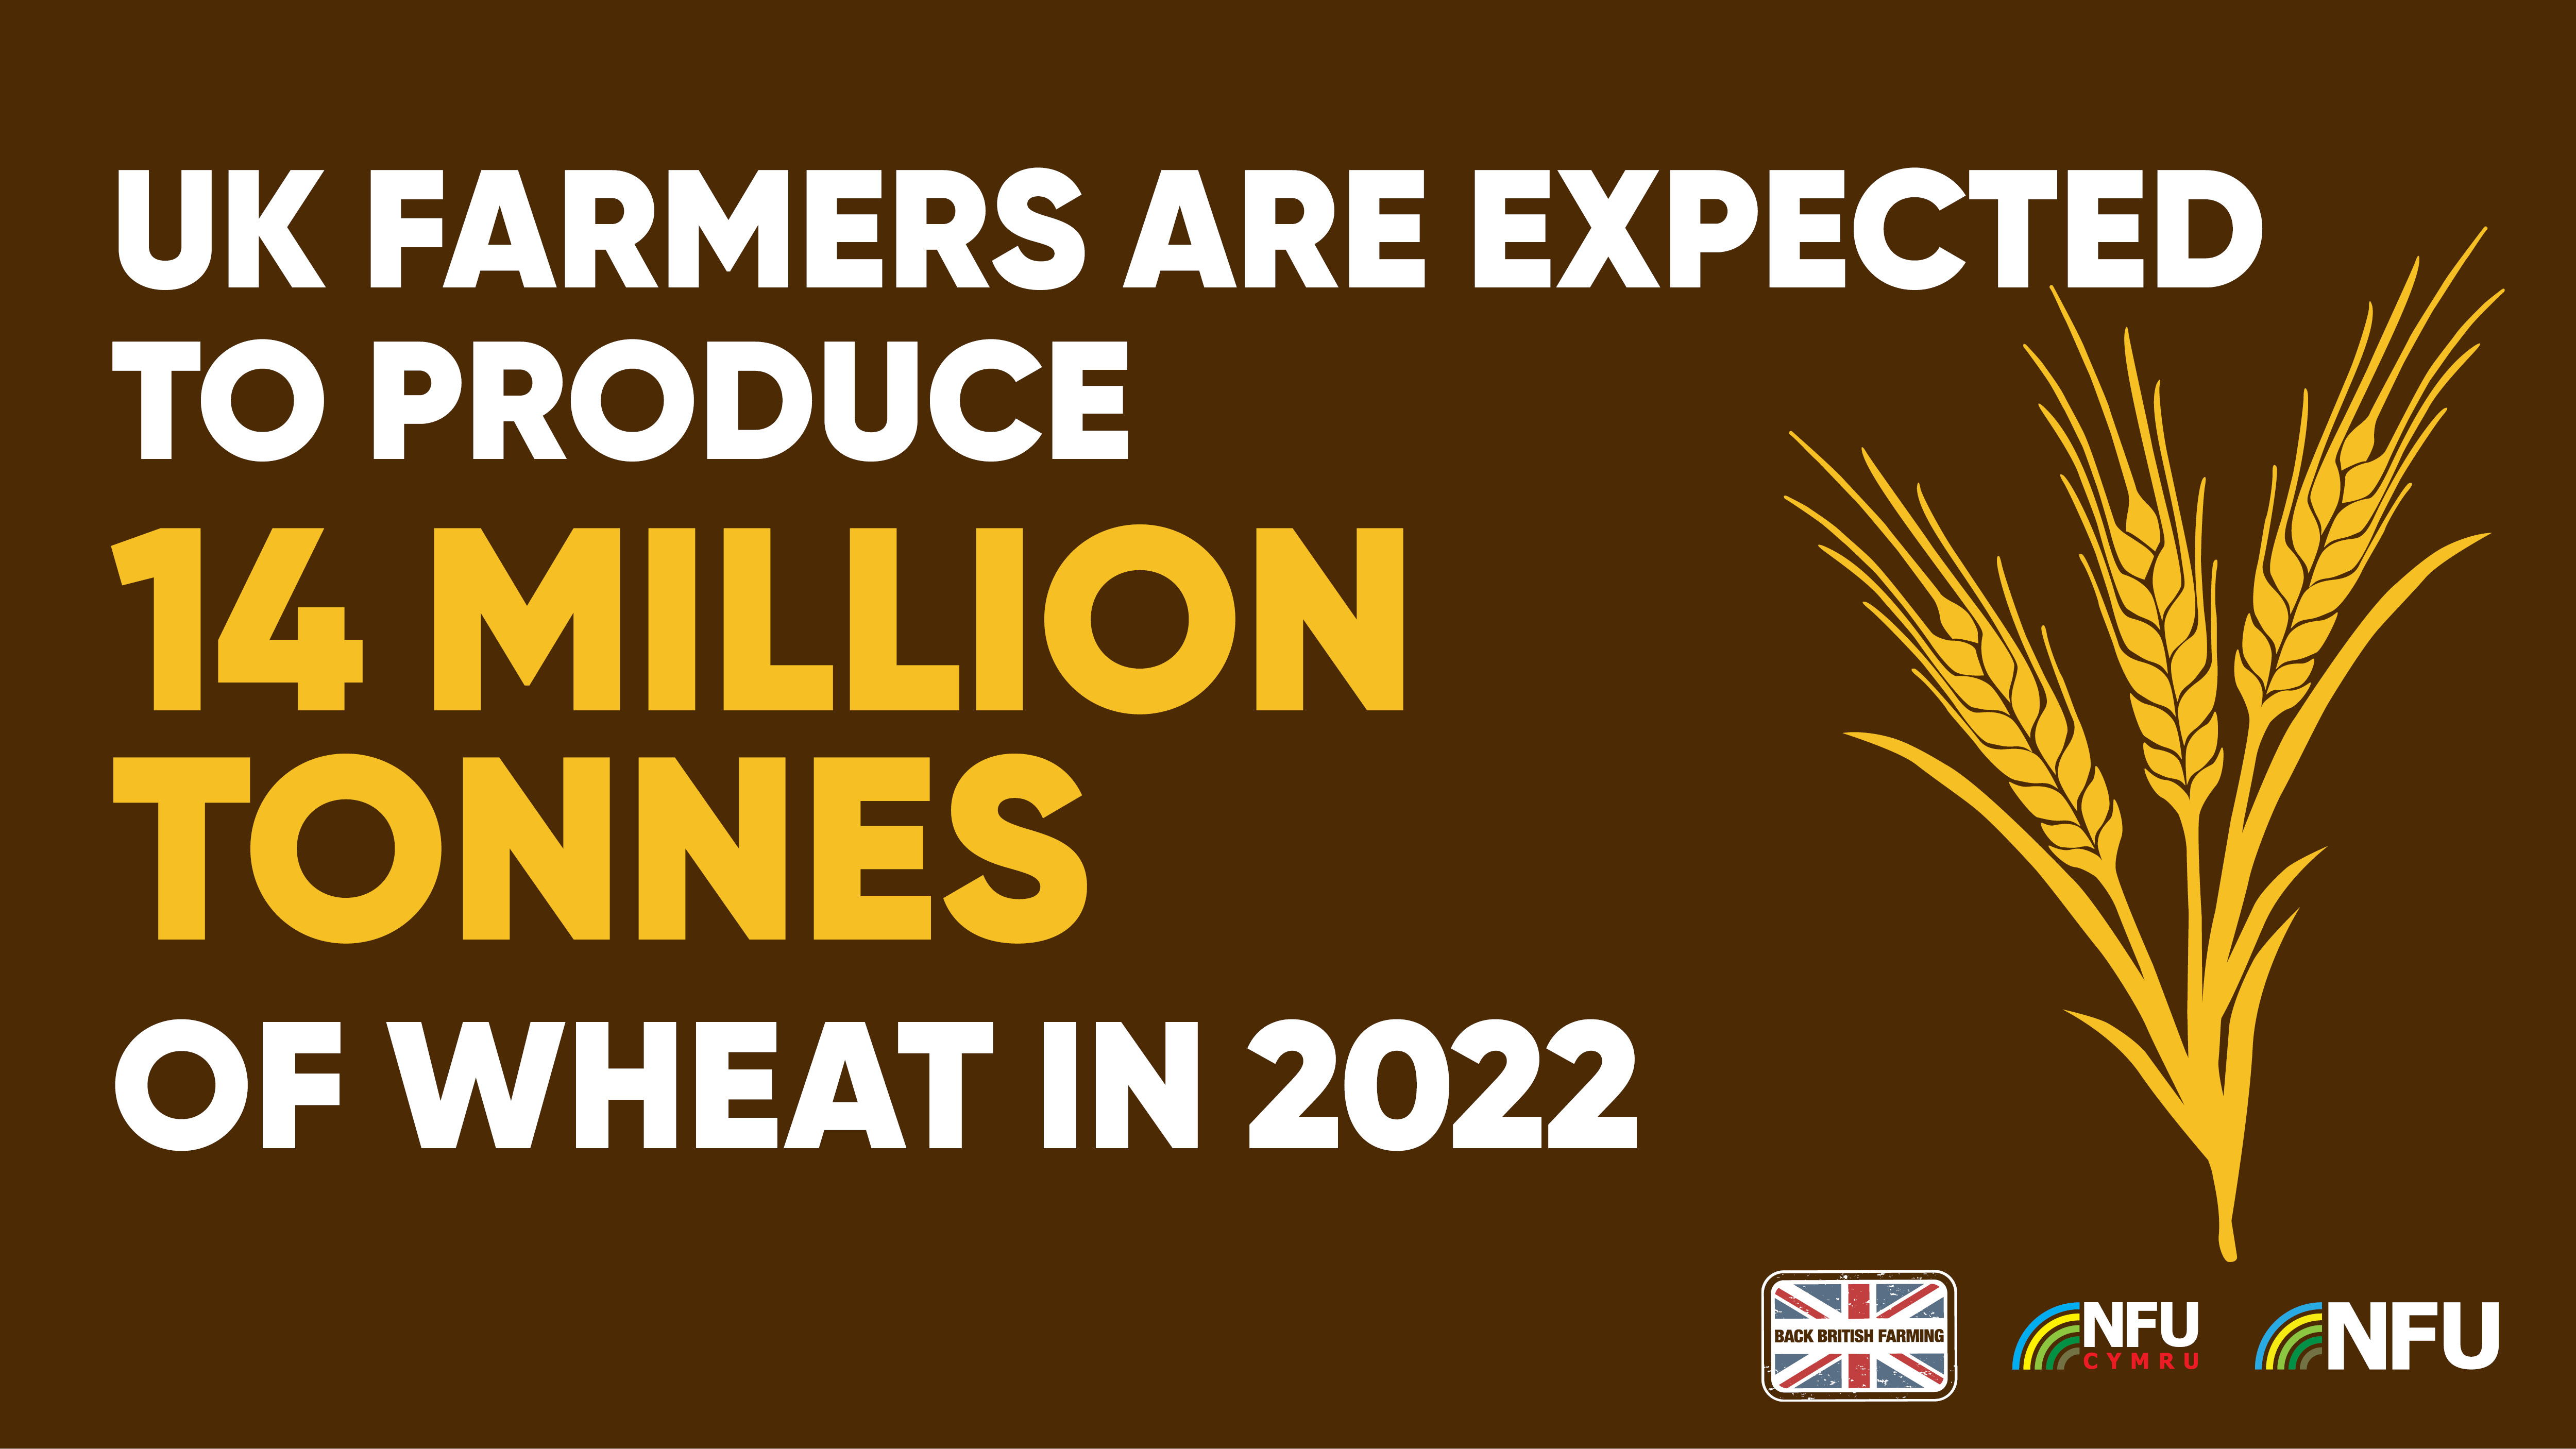 UK farmers are expected to produce 14 million tonnes of wheat in 2022